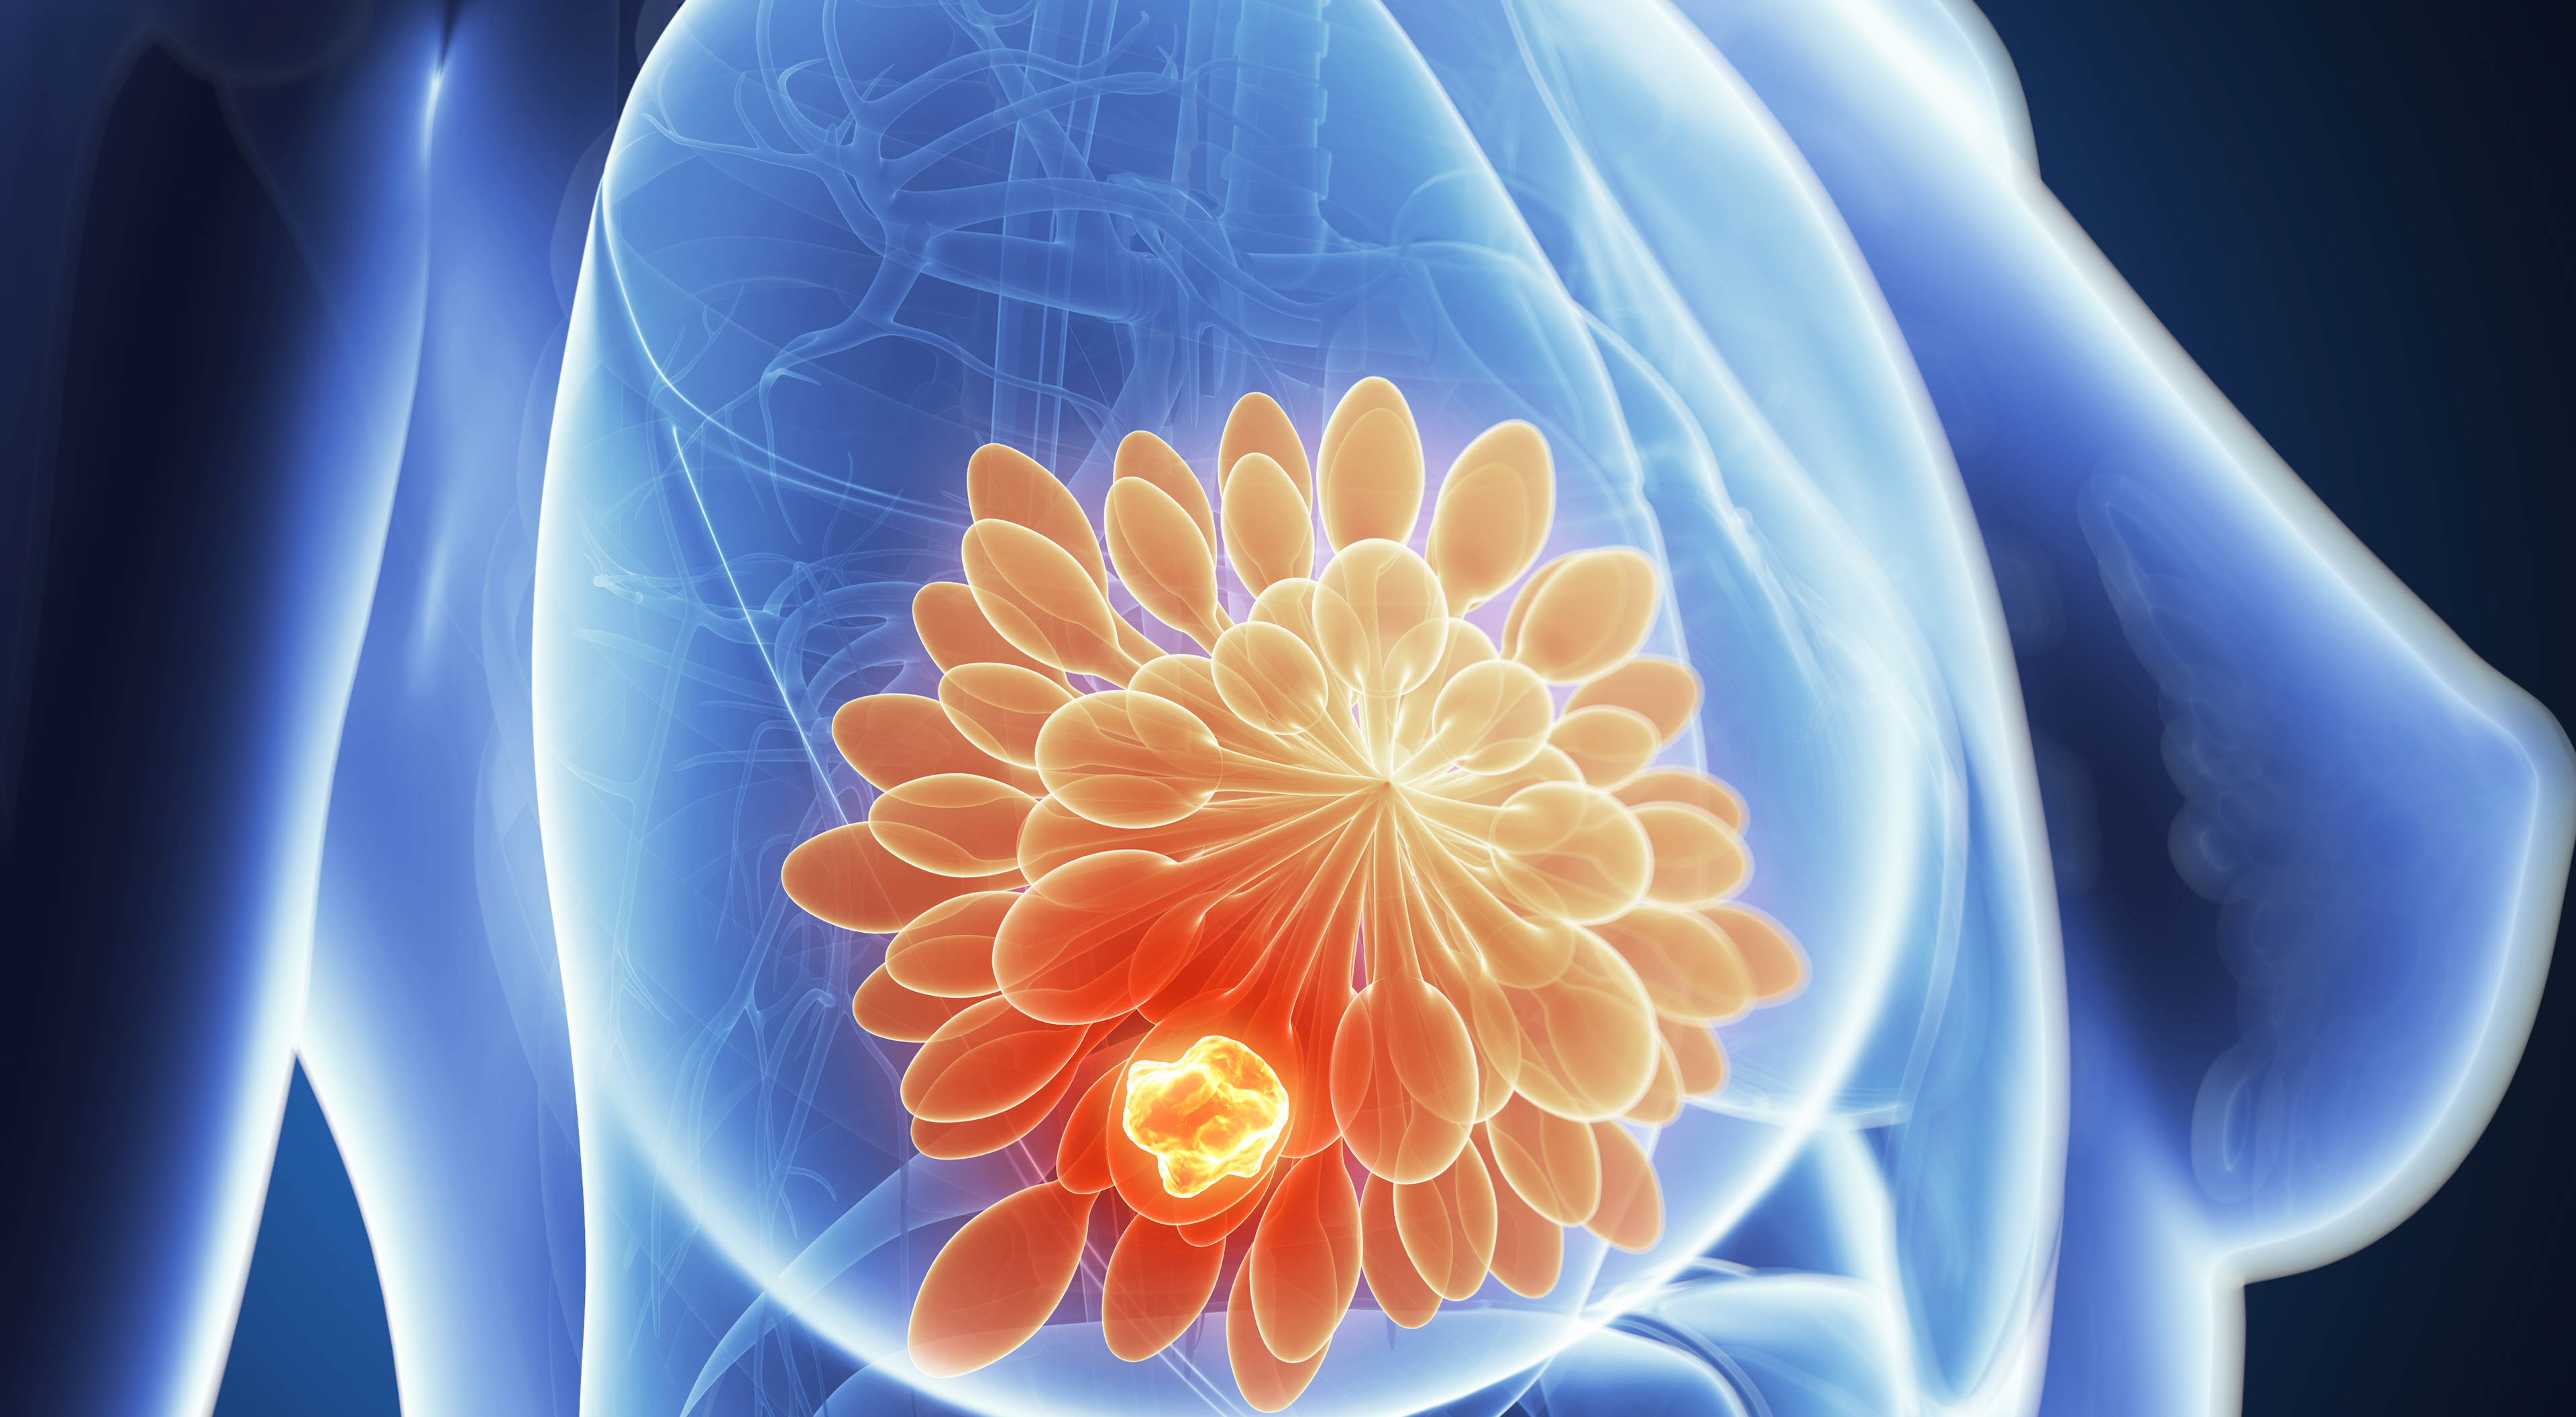 Sacituzumab Govitecan Significantly Prolongs Overall Survival in Patients With HR+/HER2- Metastatic Breast Cancer